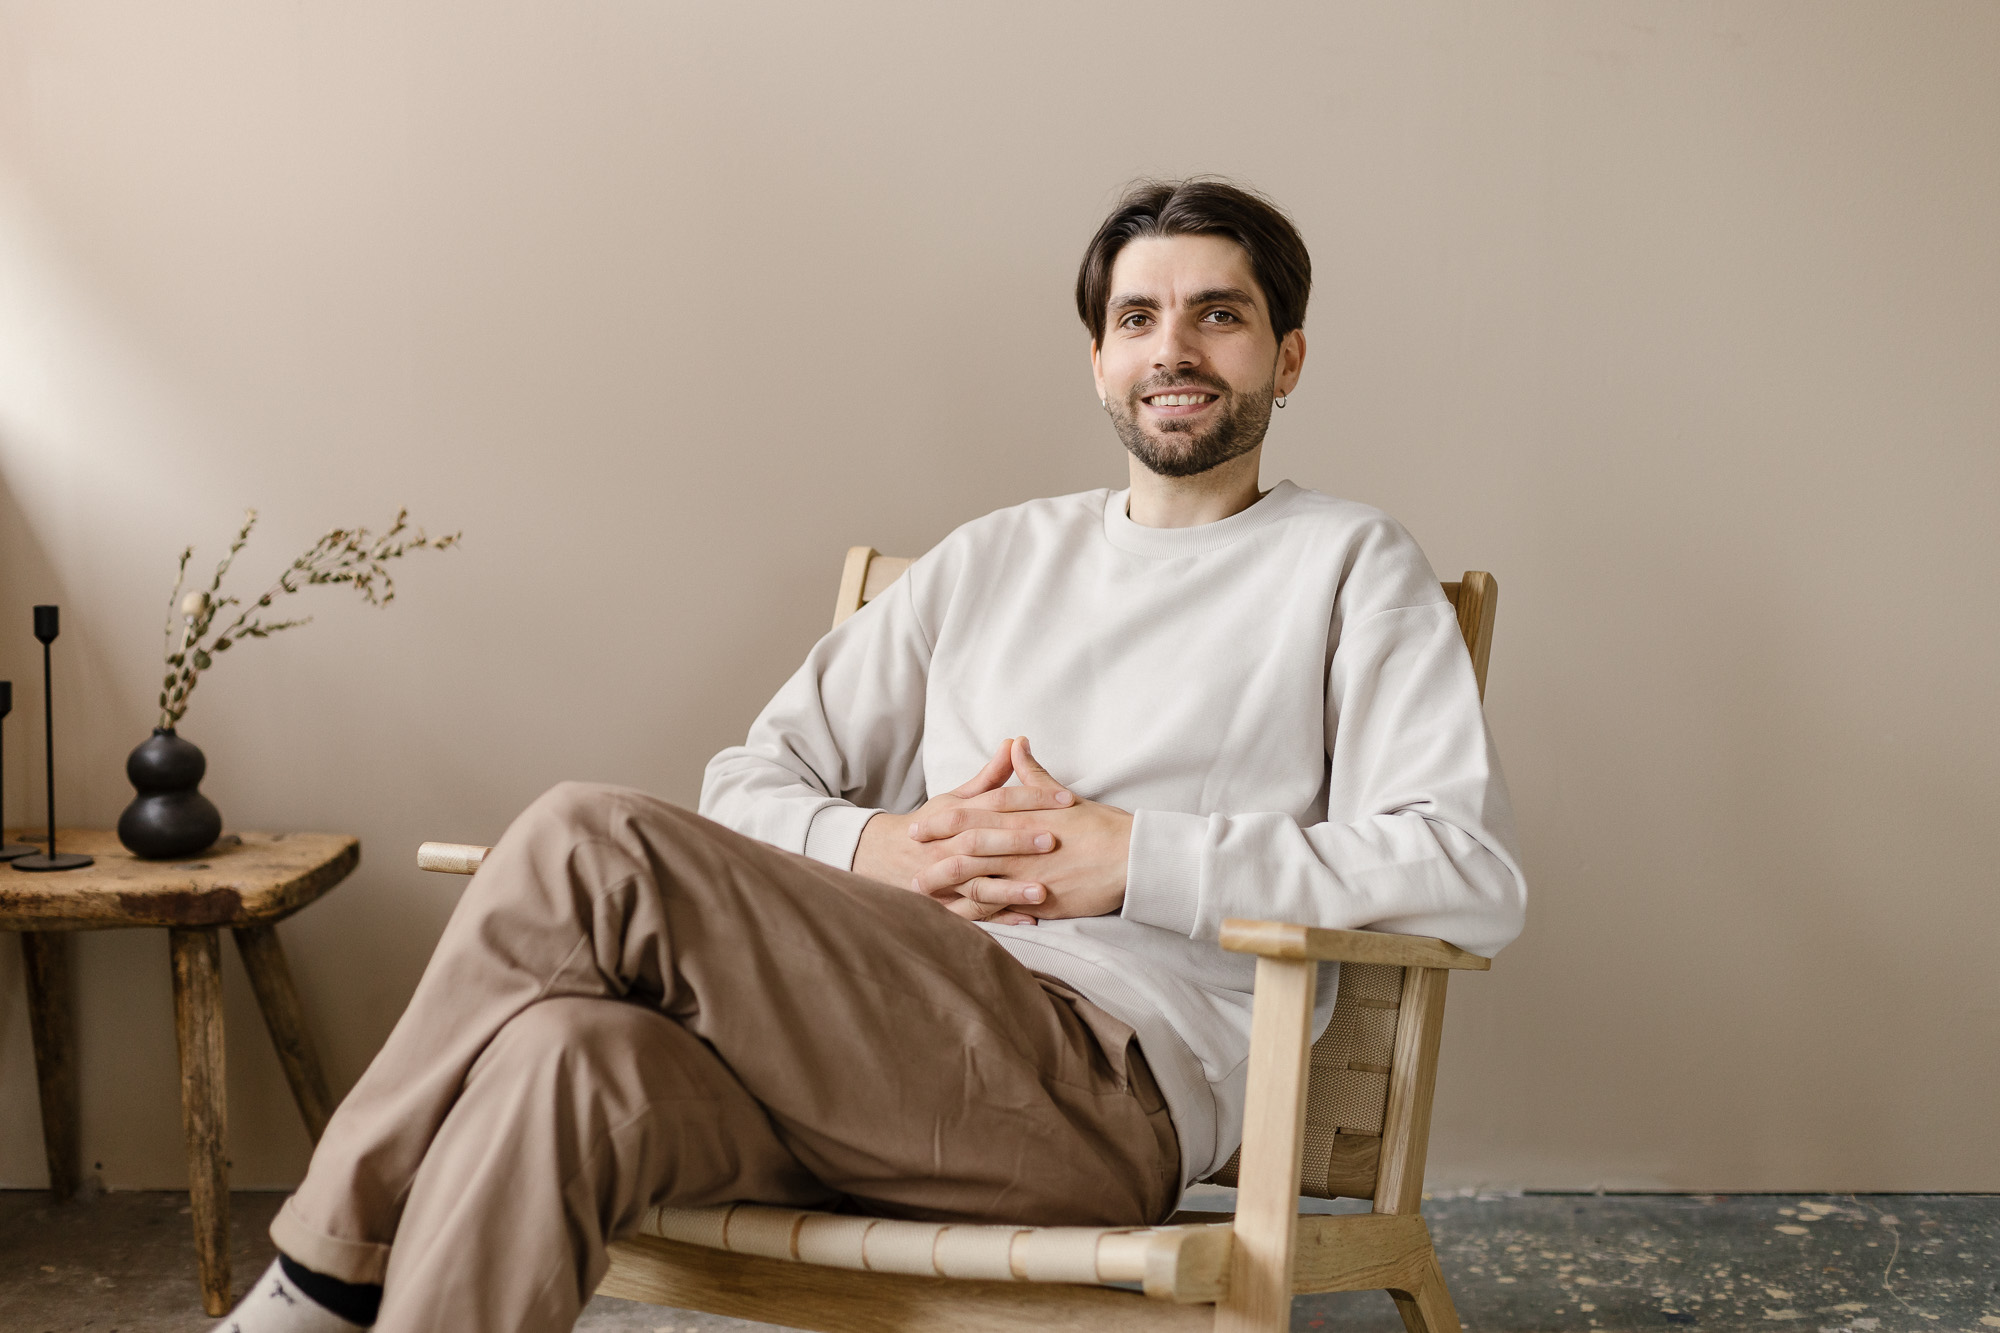 Picture of Artome's own designer Joel Hautala who sits on the chair and smiles to the camera.